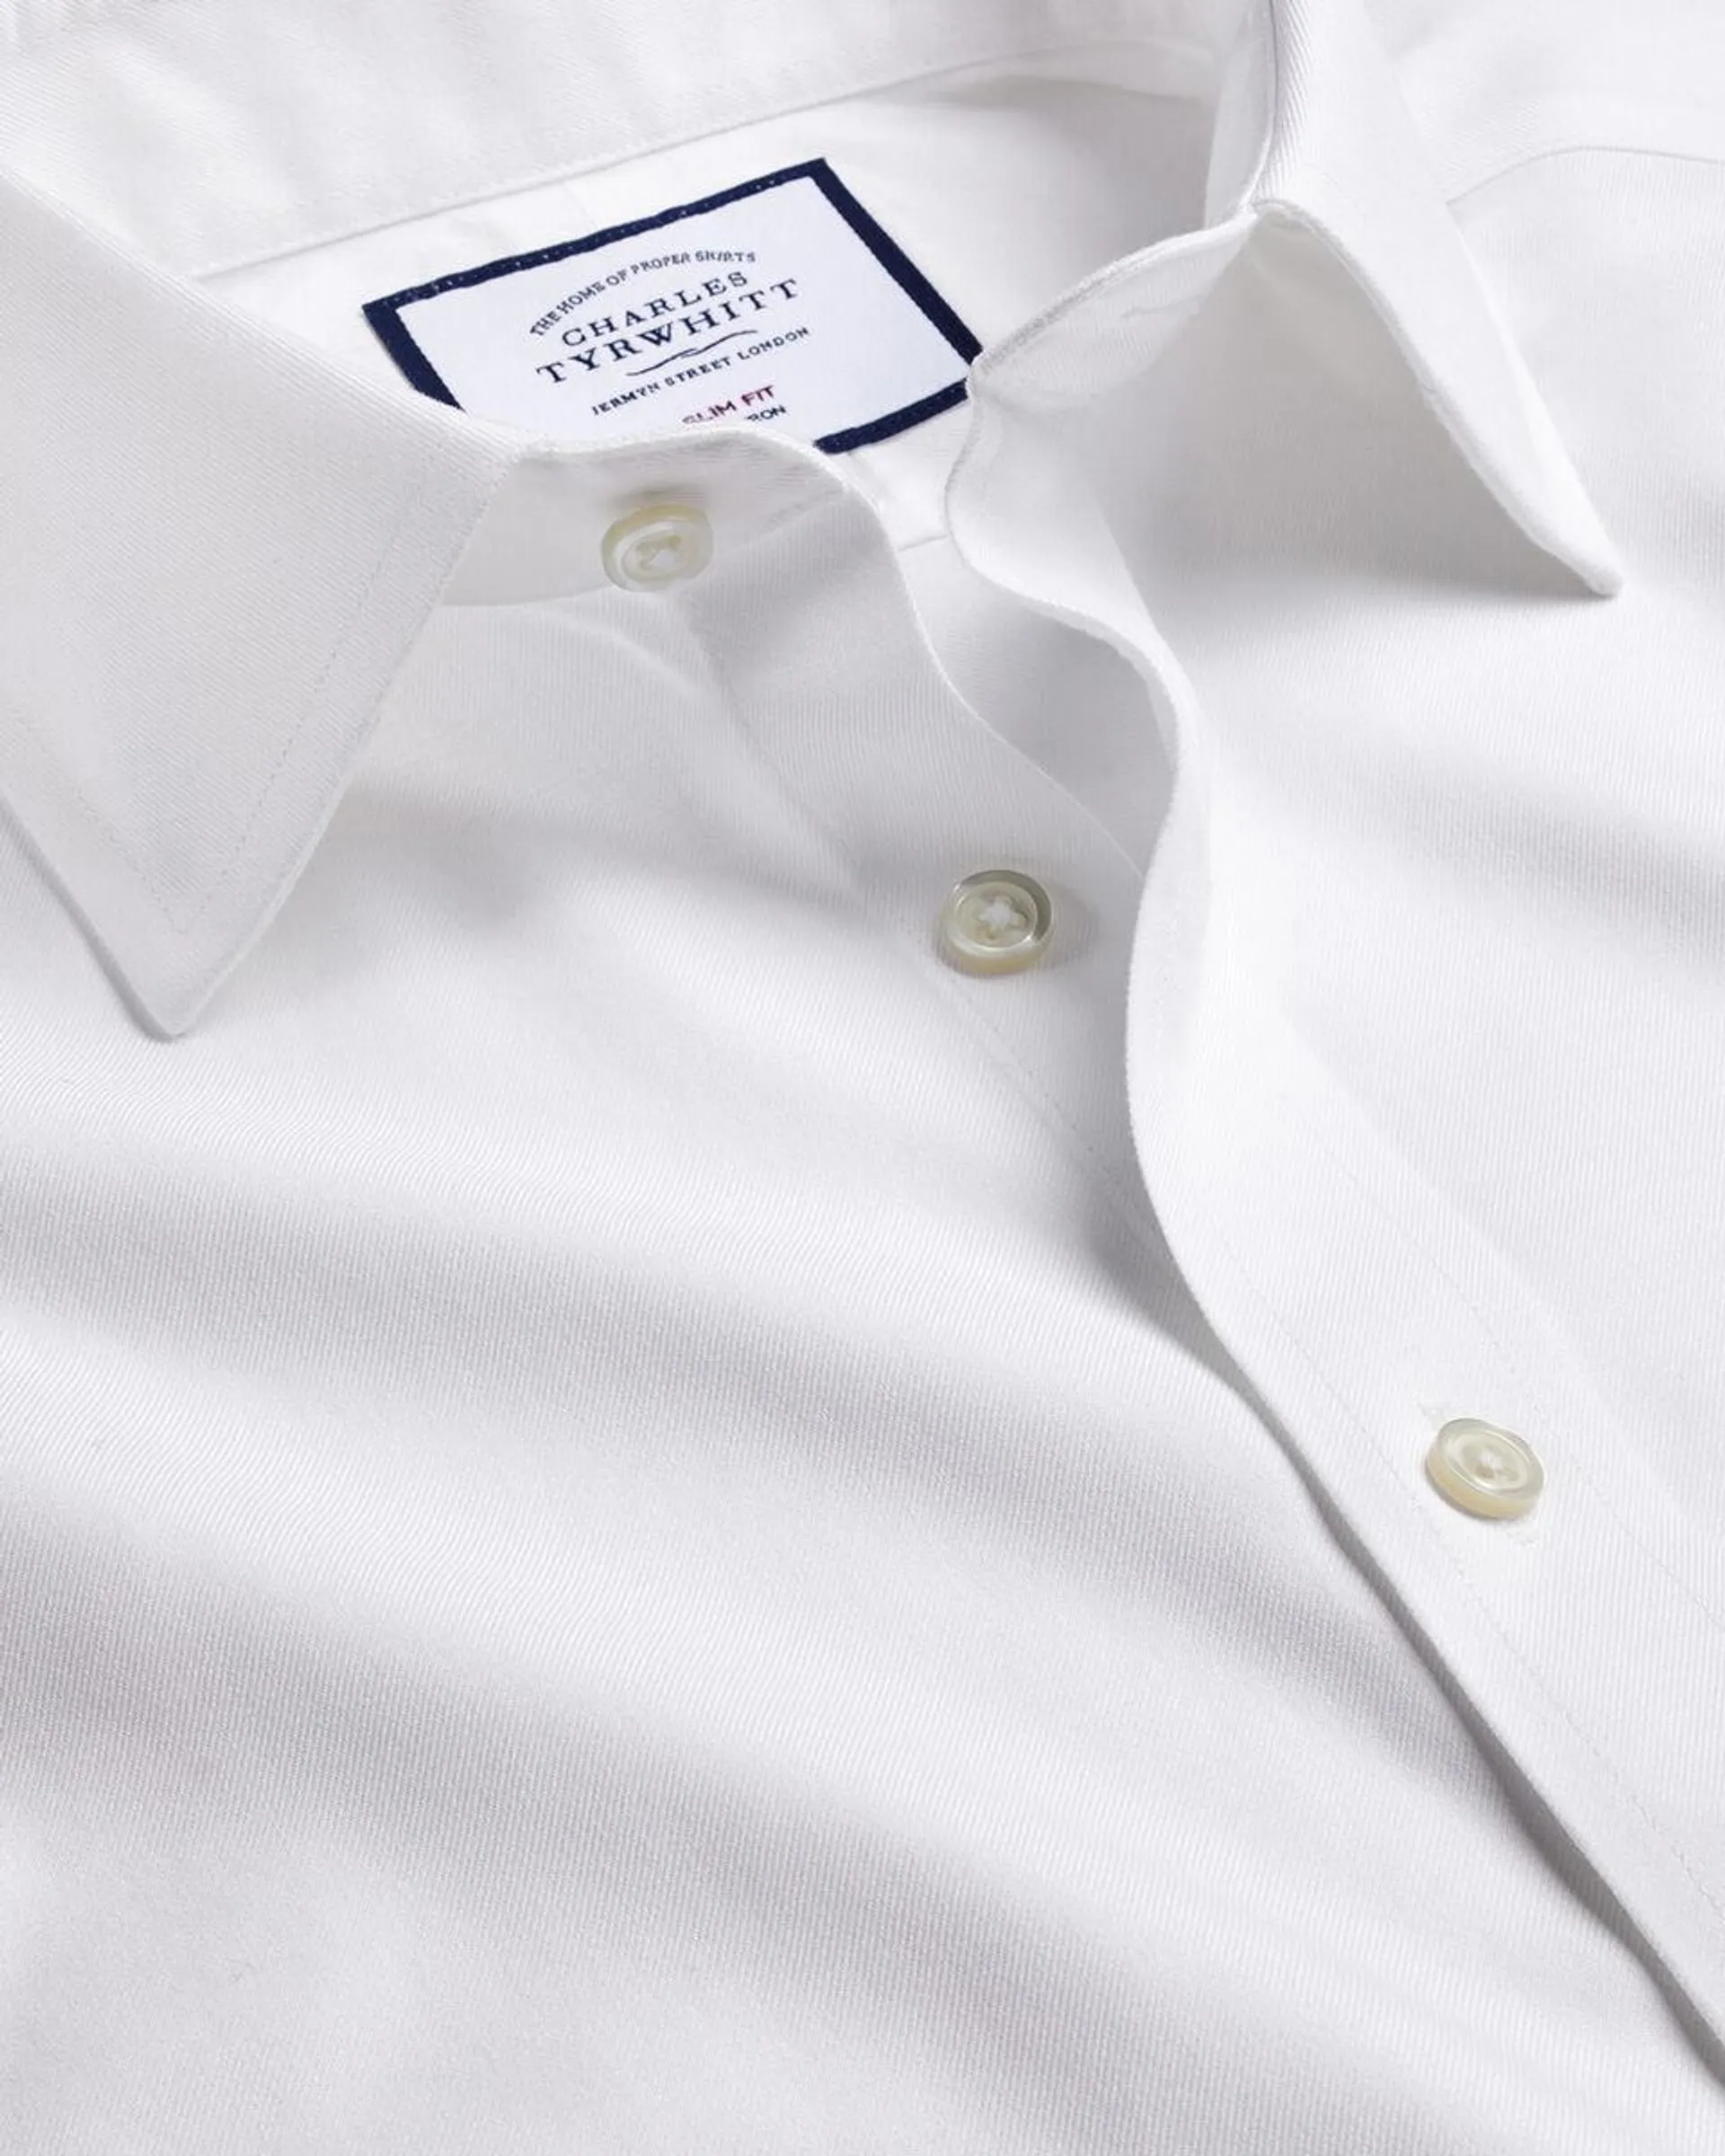 details about product: Non-Iron Twill Shirt - White